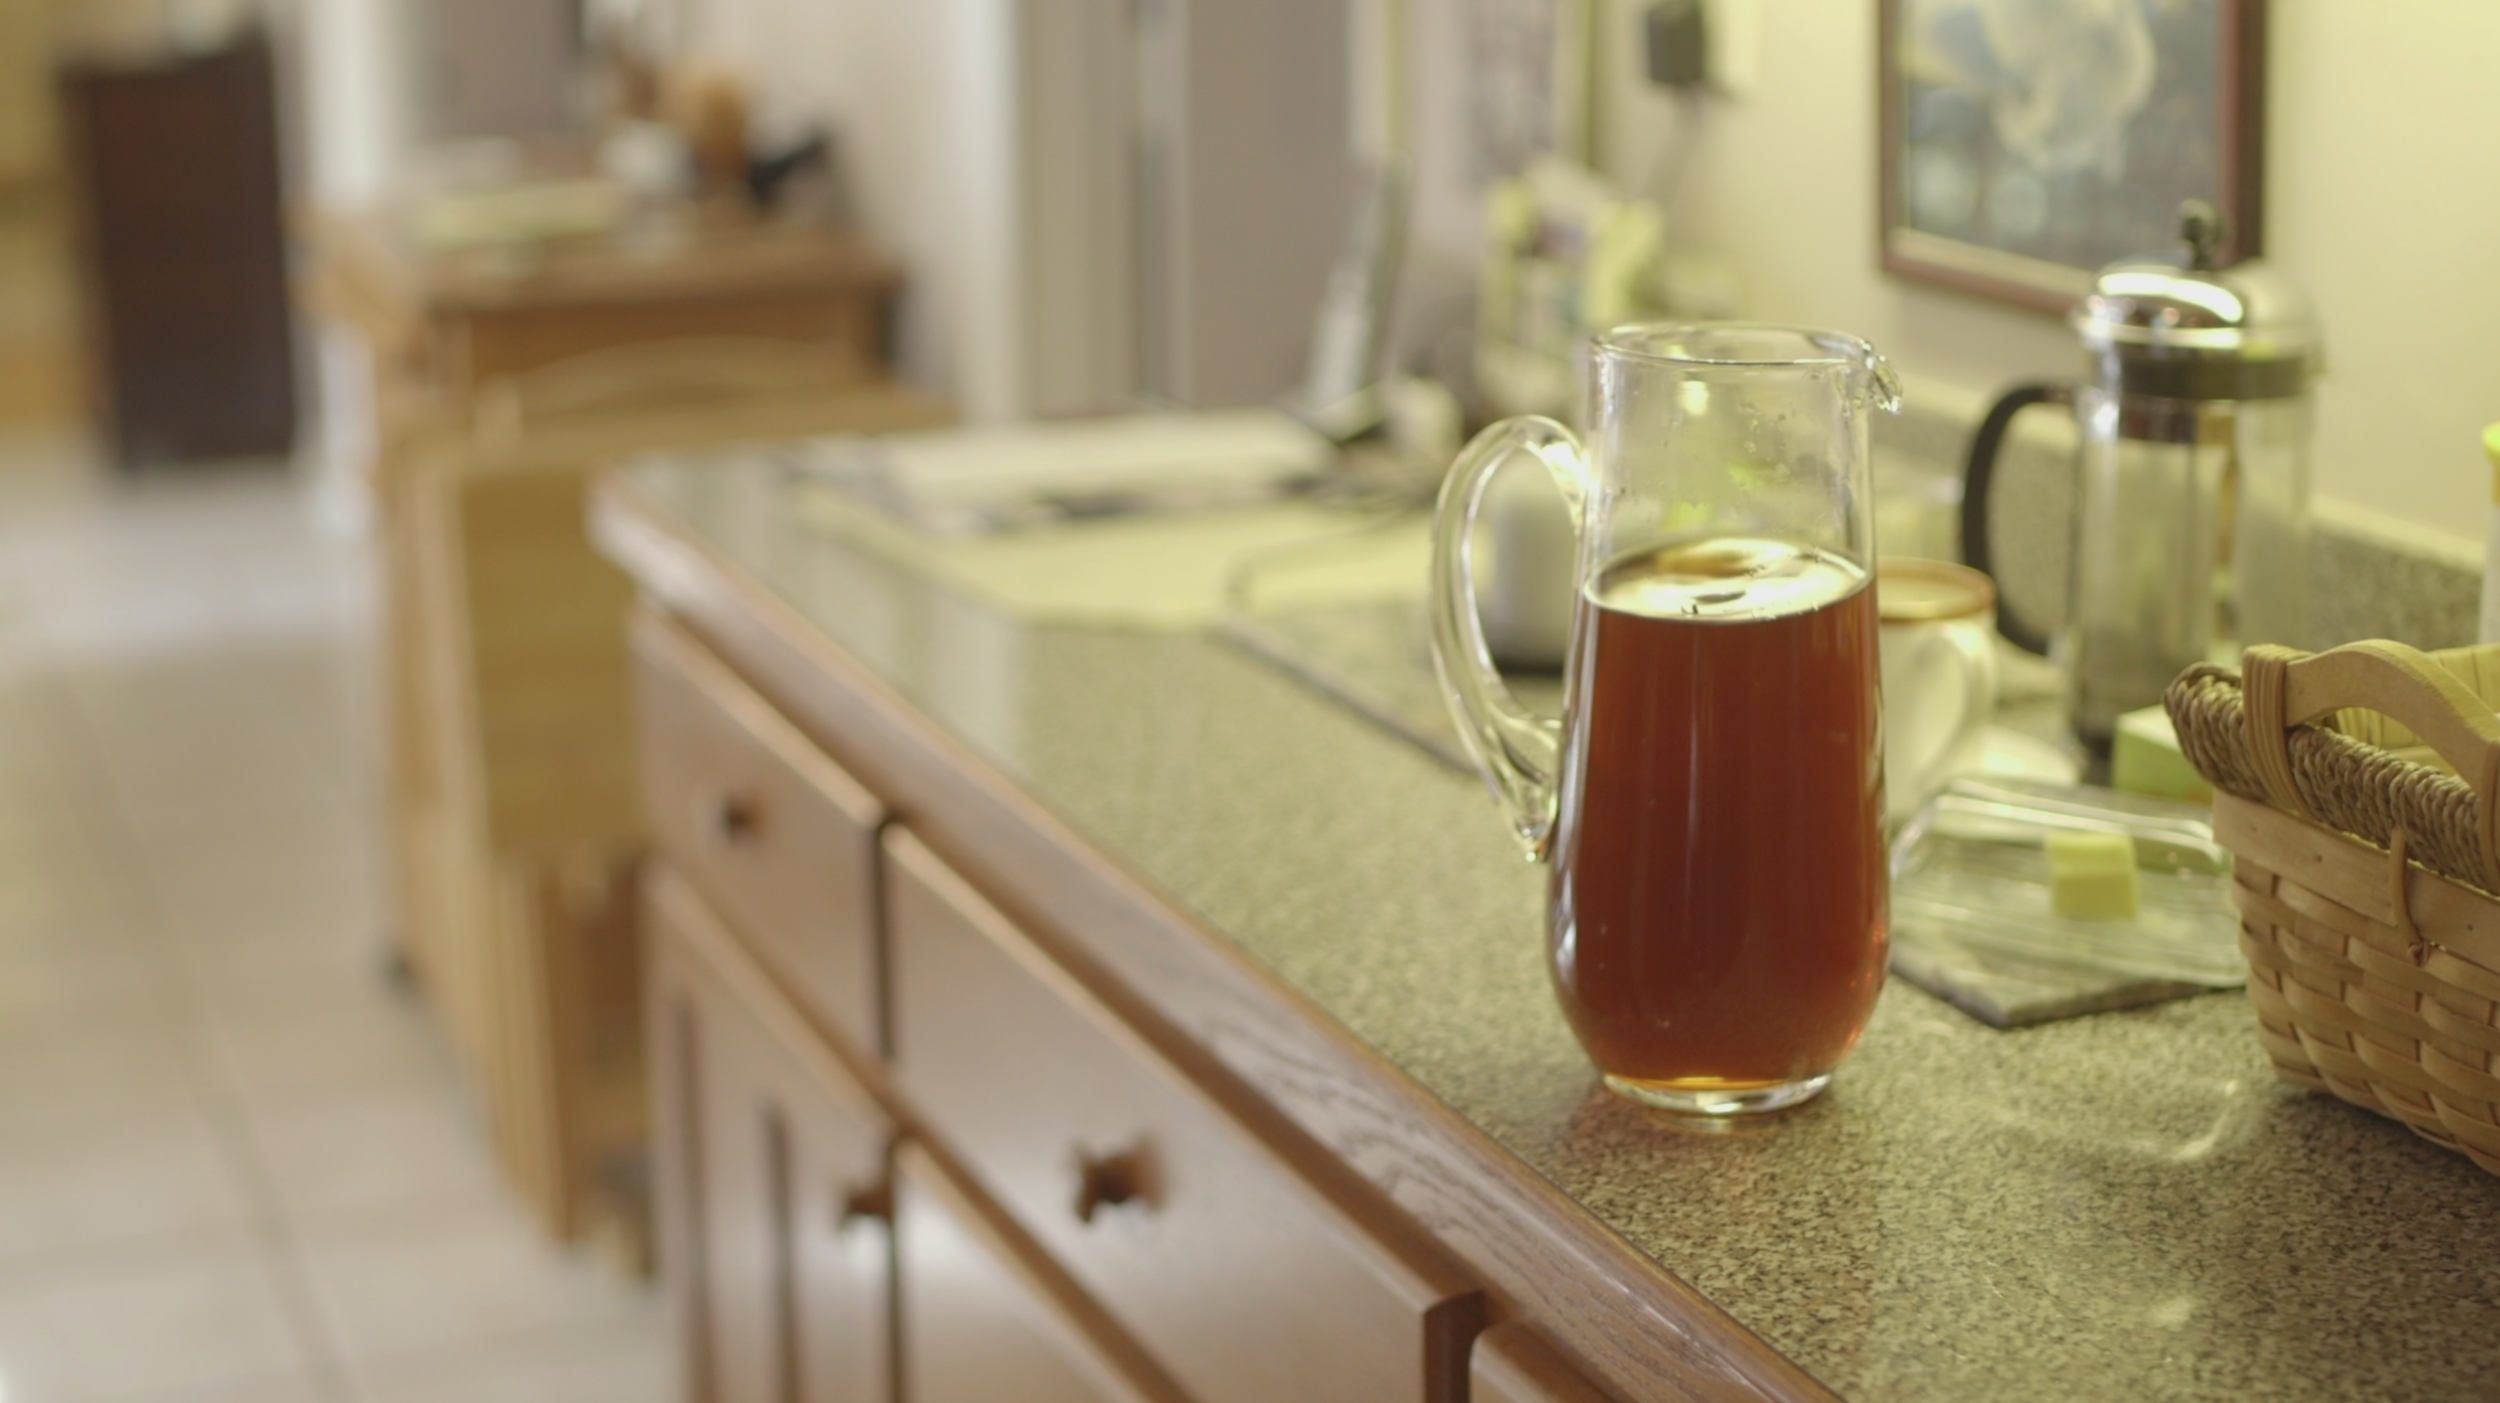 A glass pitcher filled with sweet tea on a laminate counter, with other kitchen items blurred in the background.